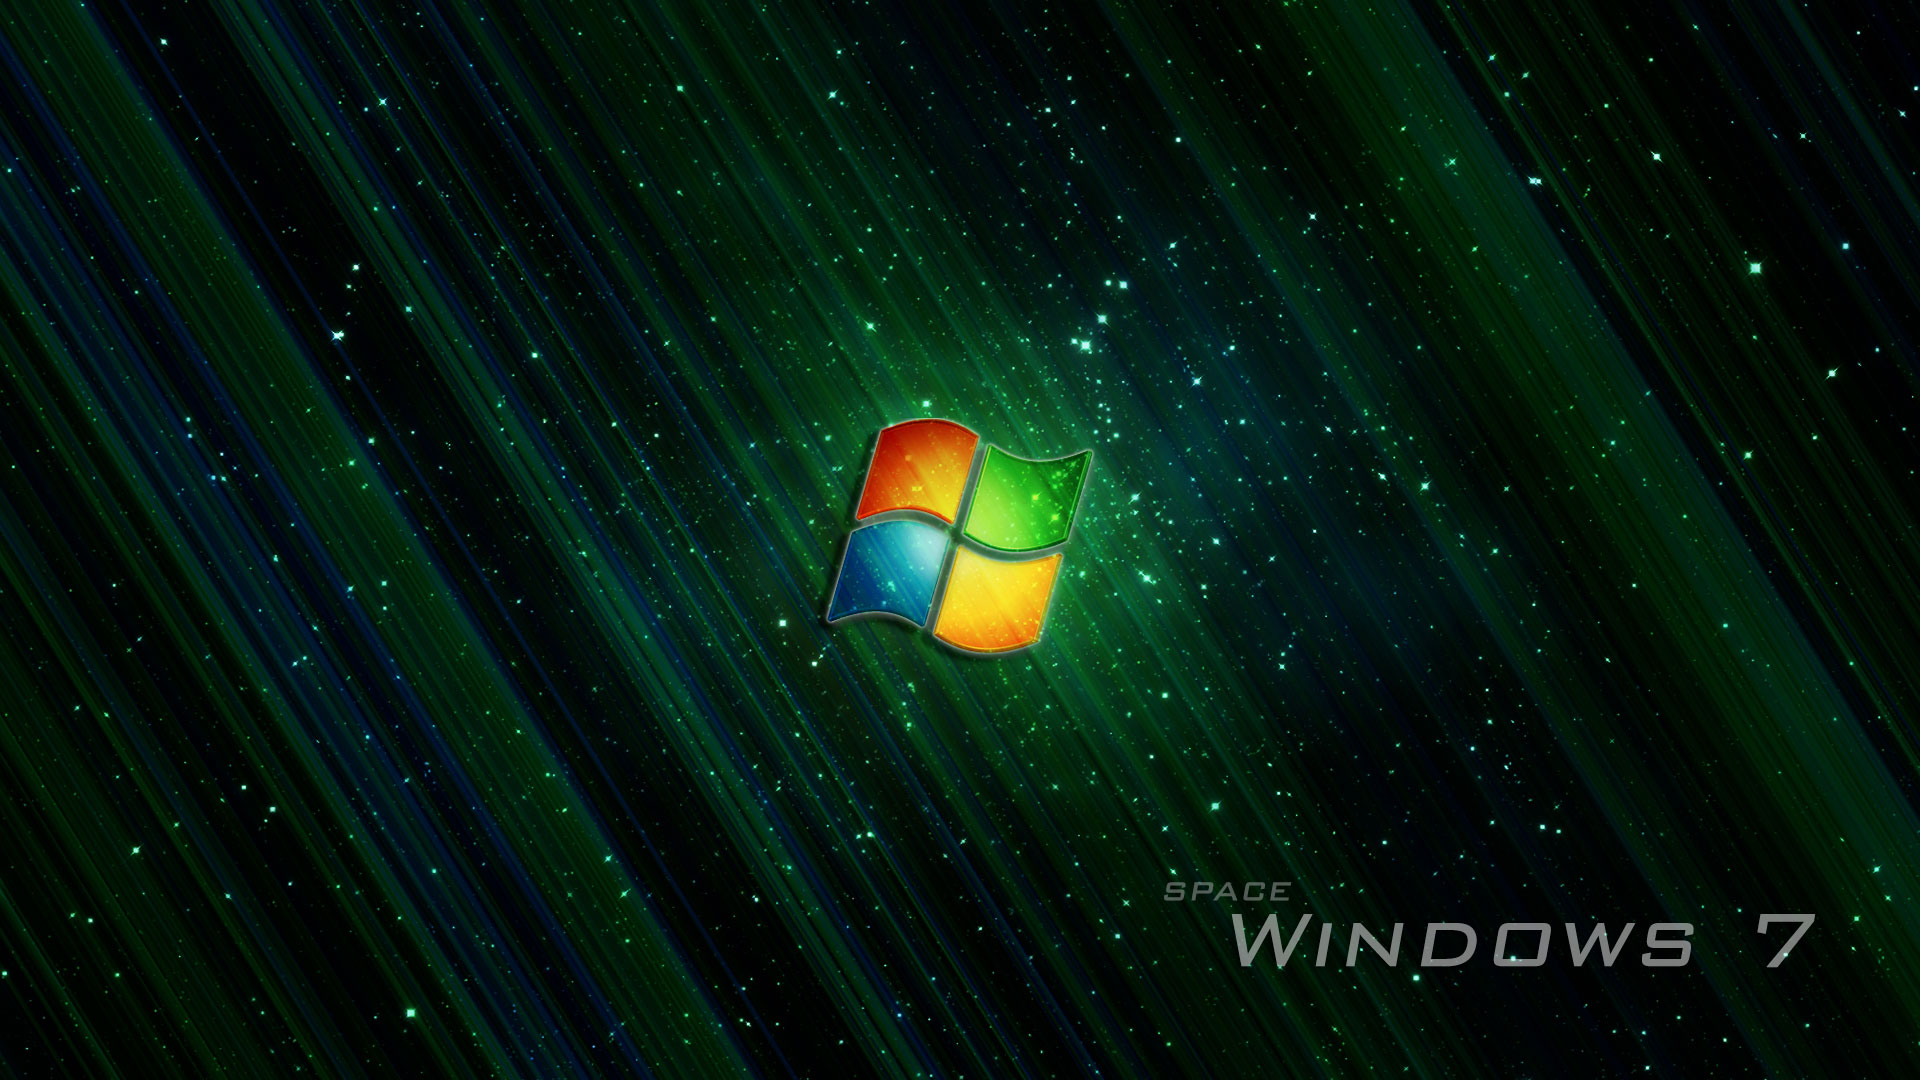 Windows Wallpaper Pro Submited Image